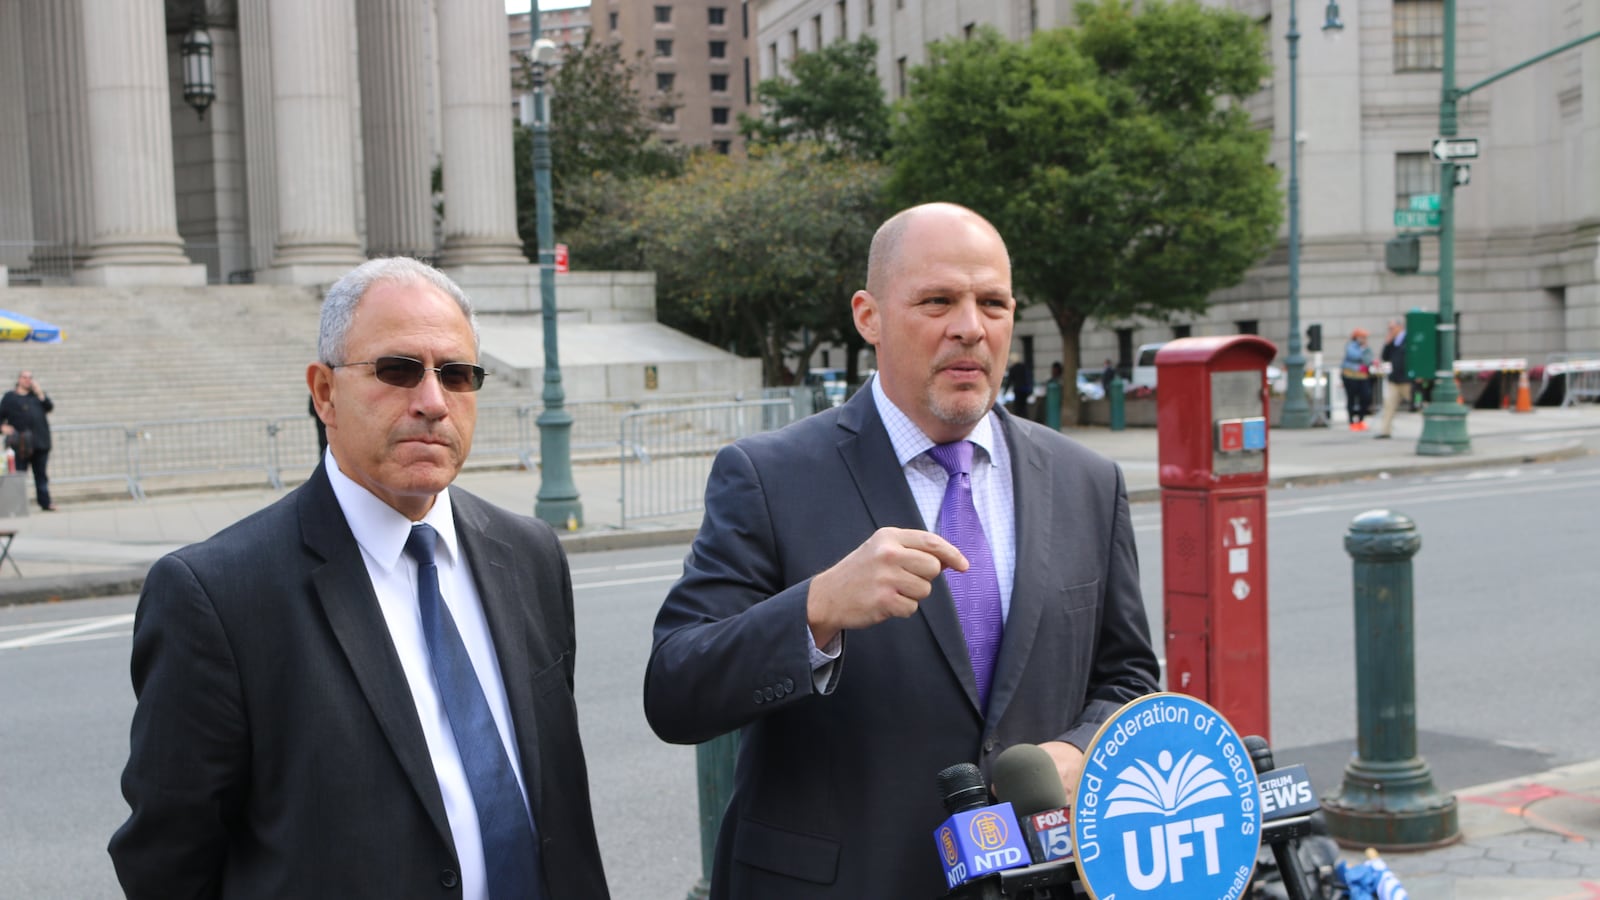 United Federation of Teachers President Michael Mulgrew (right) and state teachers union chief Andy Pallotta have projected confidence after the Supreme Court decision on Janus.